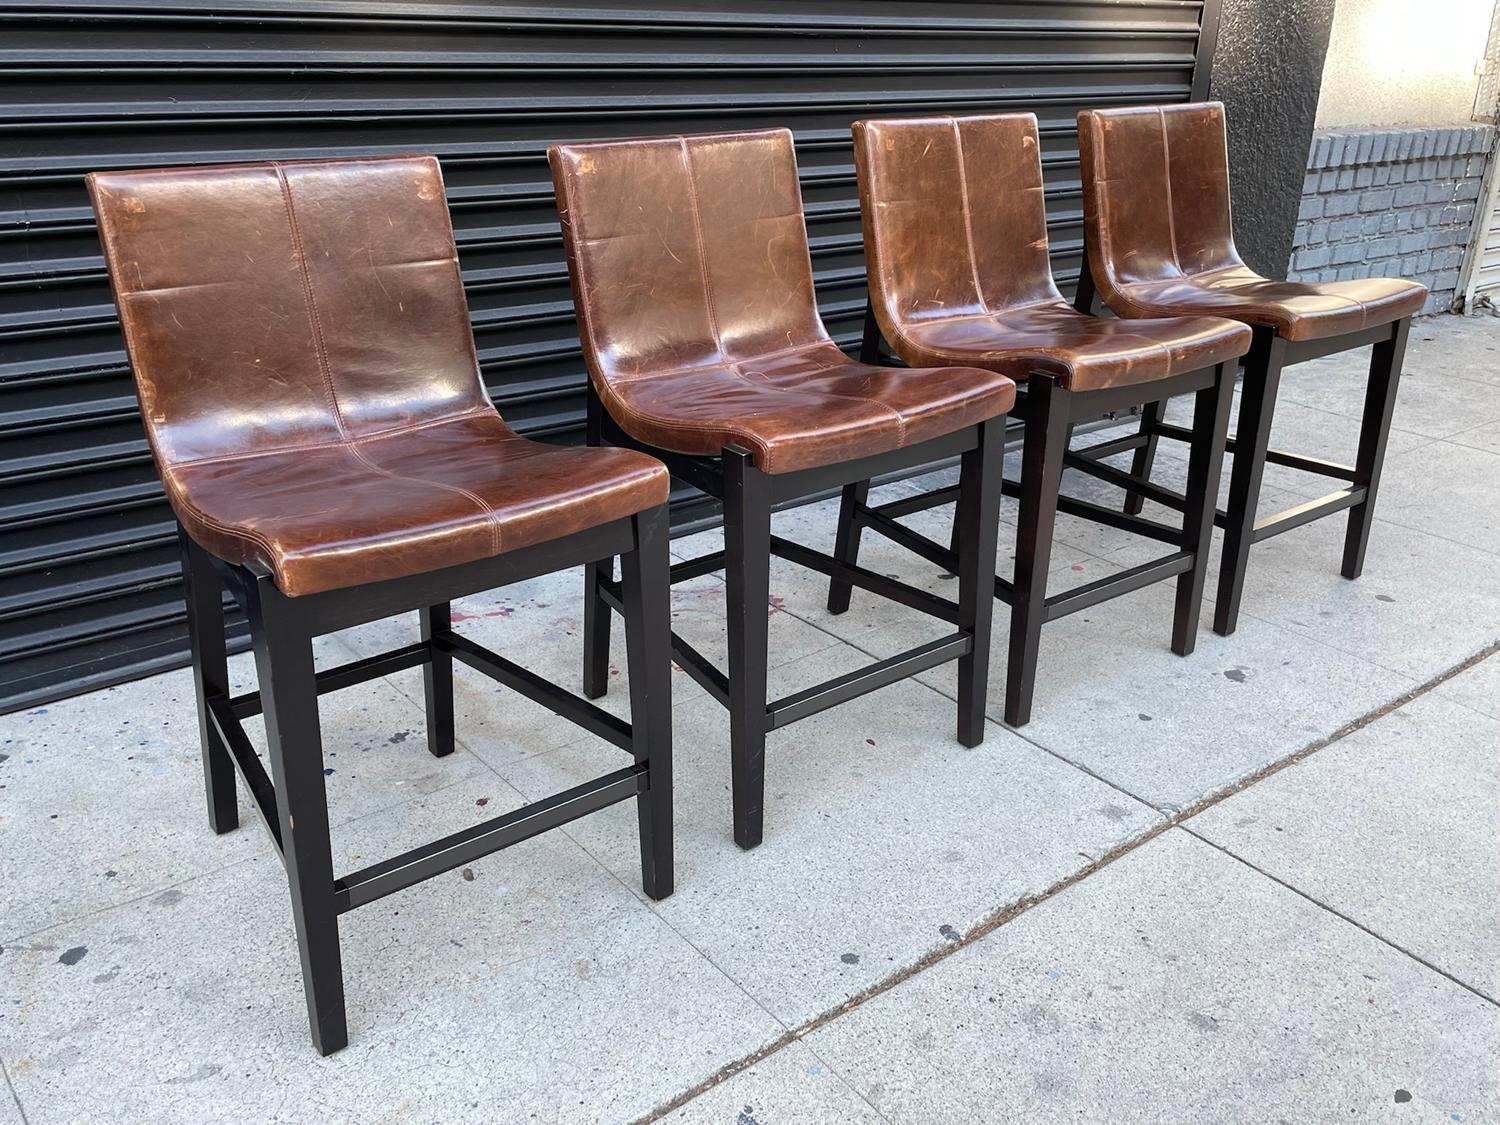 Beautiful set of 4 counter stools designed and manufactured in the US by Holly Hunt and part of the Sirene collection.

The stools have beatiful lines, the dark woden frames have great architectural lines and the brown leather is warm and